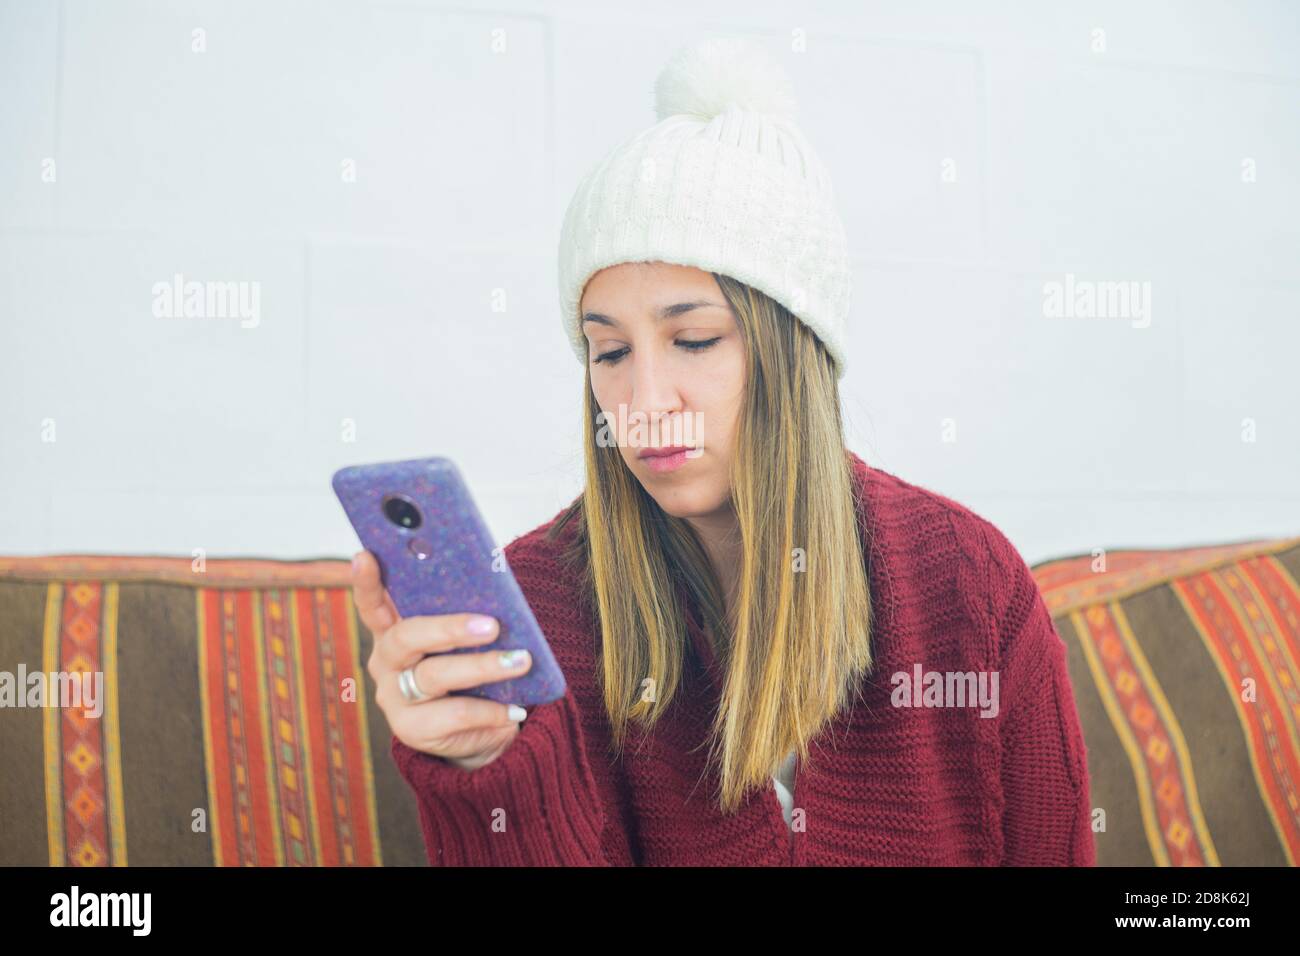 Closeup shot of a girl wearing a red cardigan looking at her phone Stock Photo